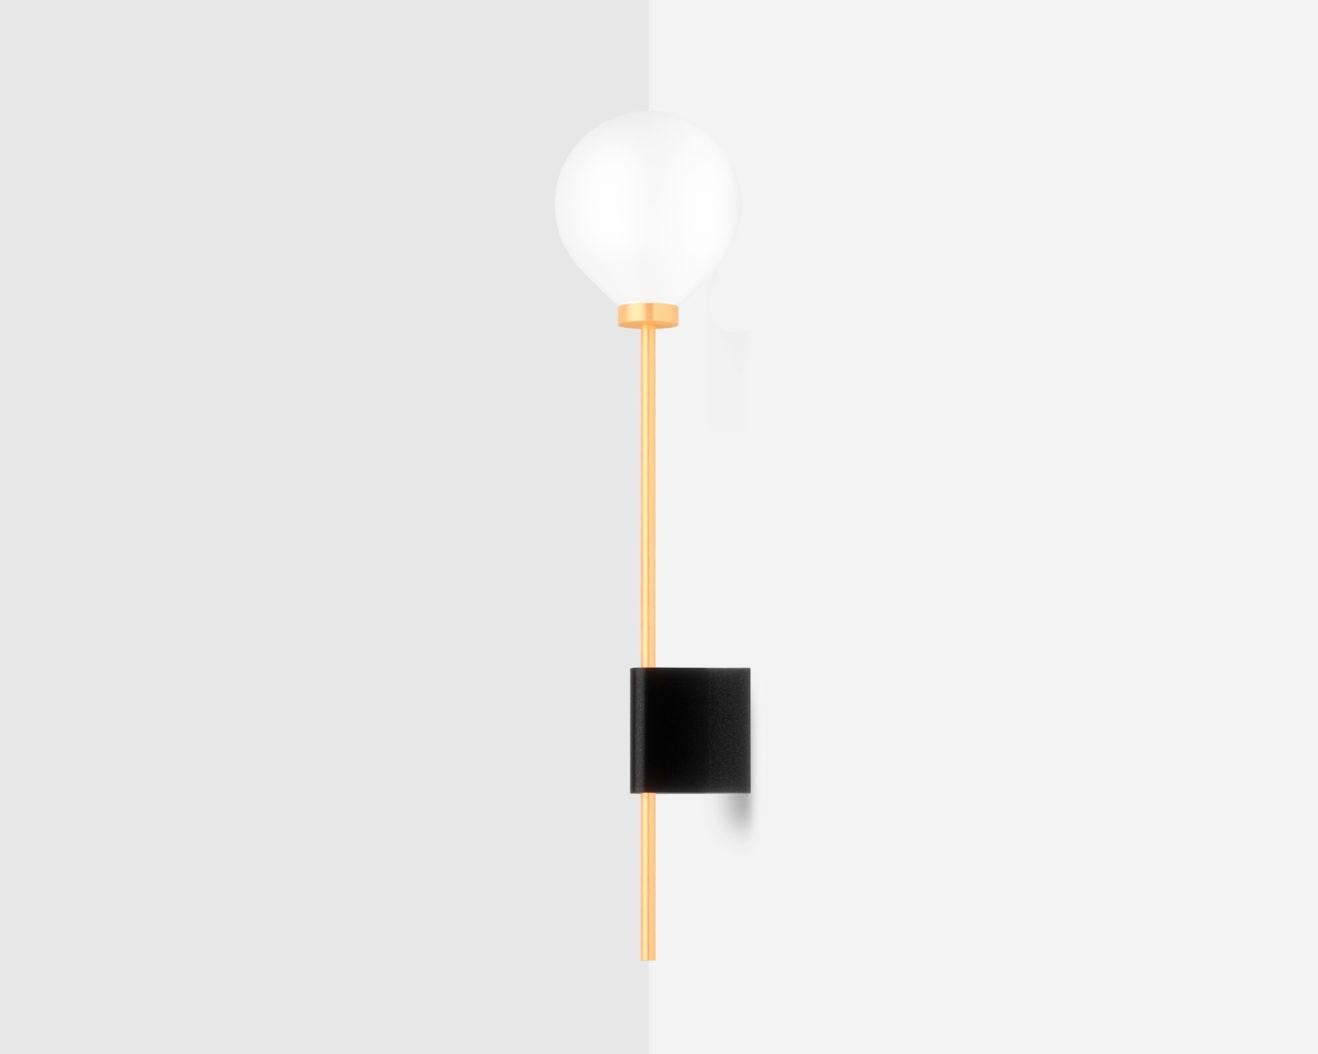 Lanta is a Minimalist sconce / wall lamp designed by Wishnya Design Studio.
Brass.

Two finishes: white marble or black granite

Measures: 57 x 15 x 12.5 cm
LED G4 35W 220V (dimmable) - US compatible.